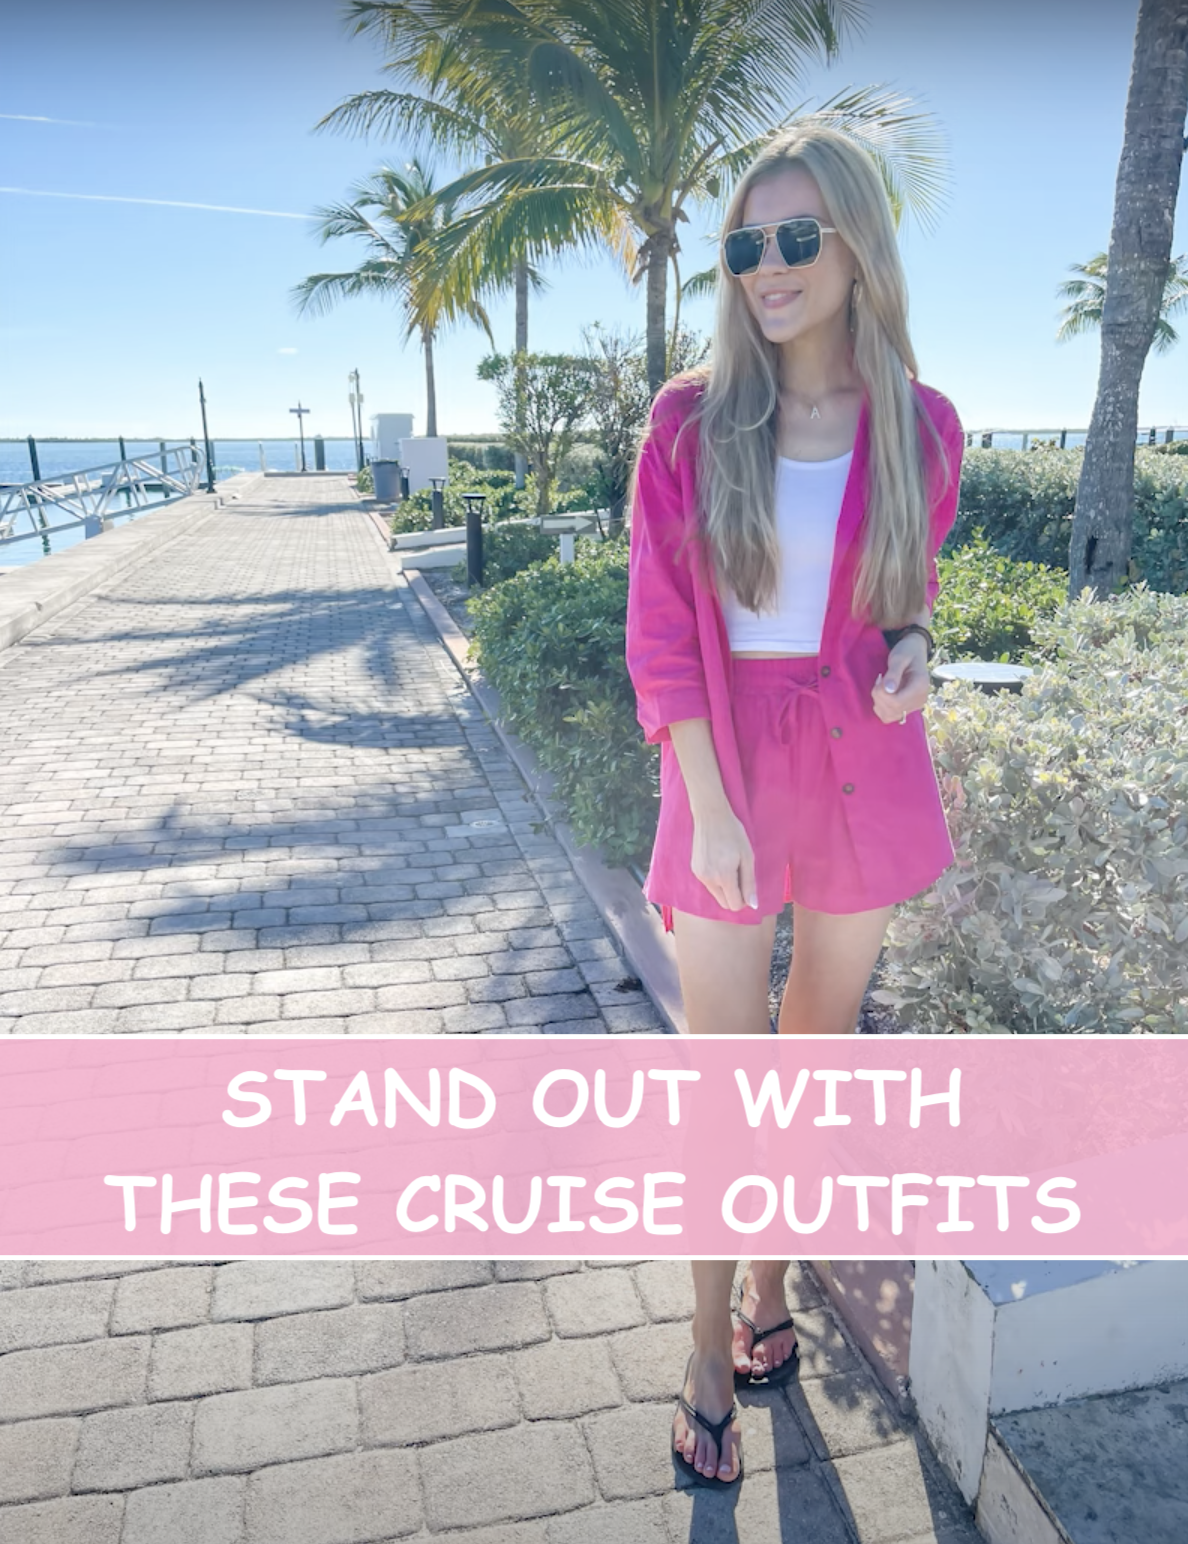 Stand out with these cruise outfits